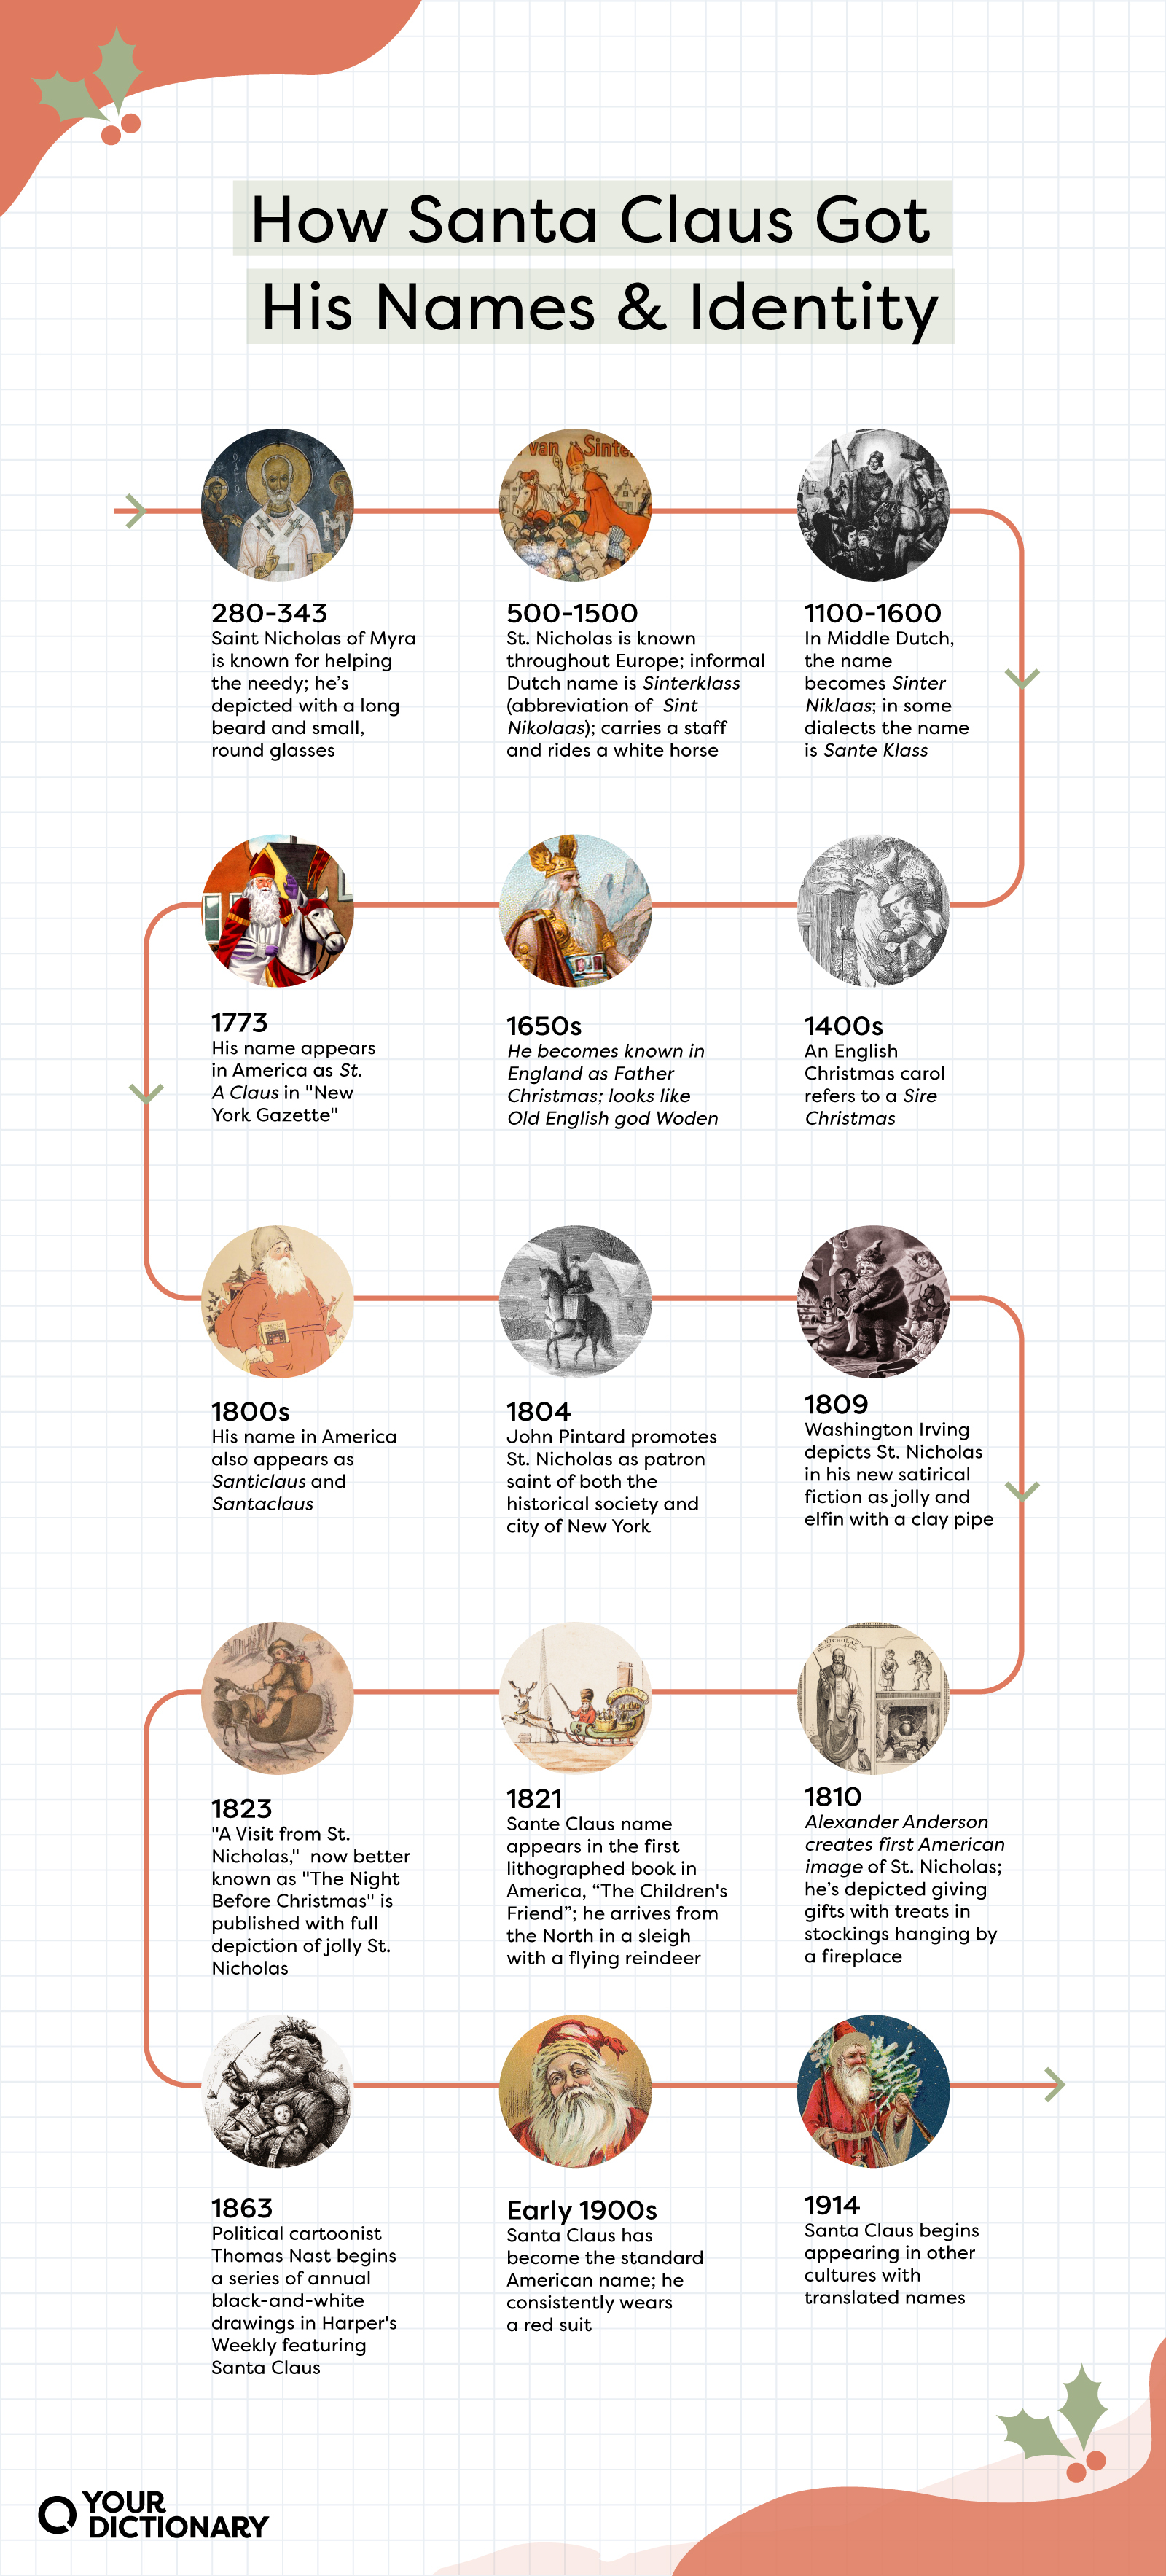 timeline of names for Santa Claus with descriptions of him from the 200s through the 1900s